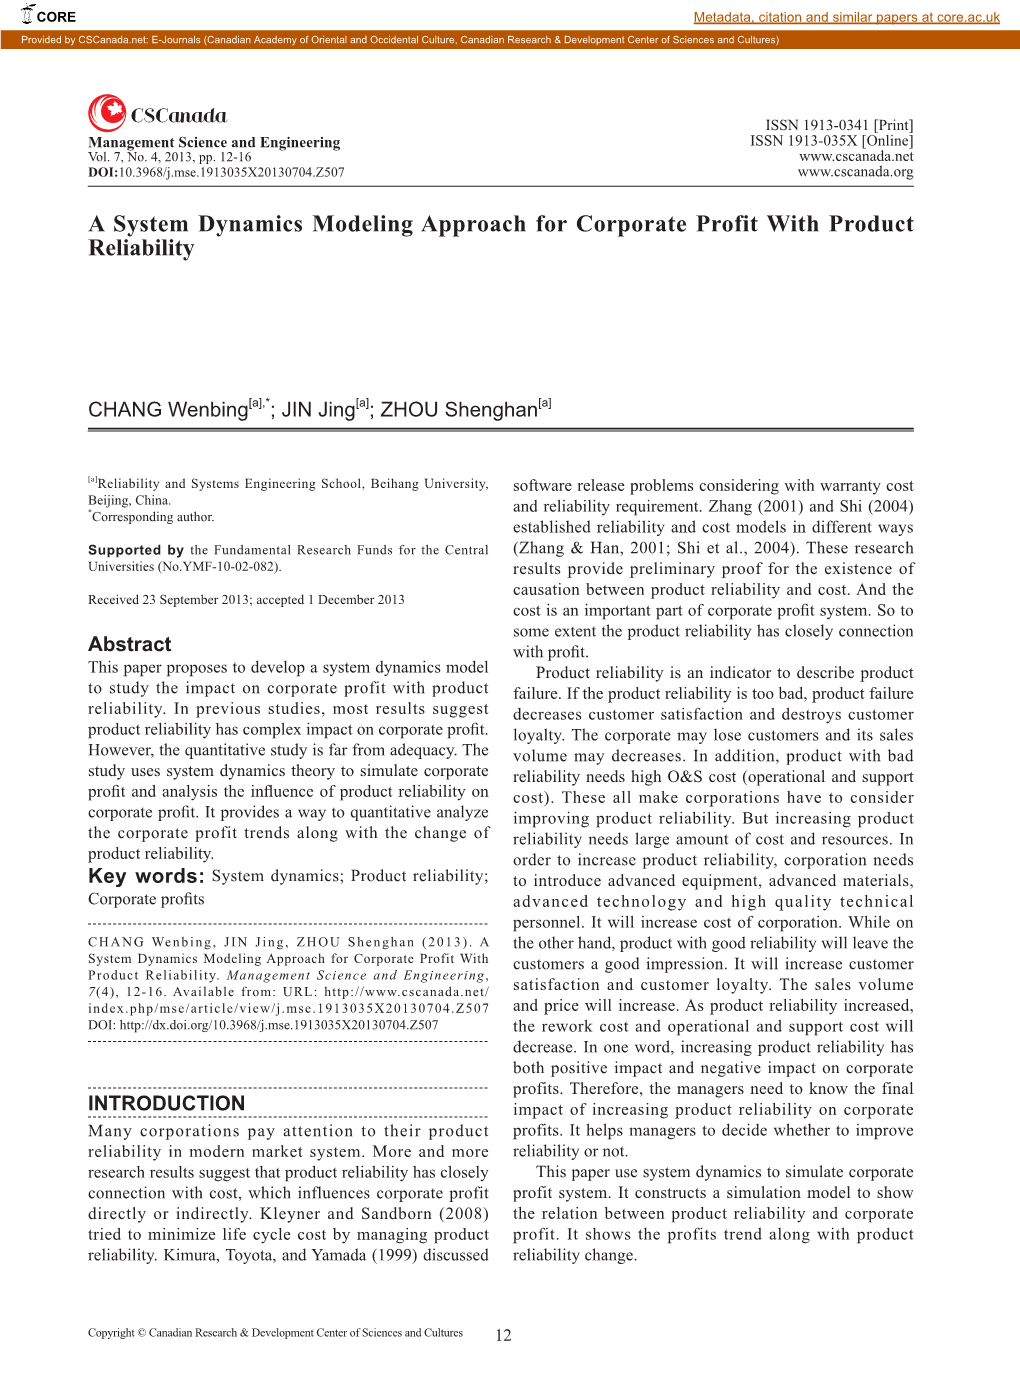 A System Dynamics Modeling Approach for Corporate Profit with Product Reliability